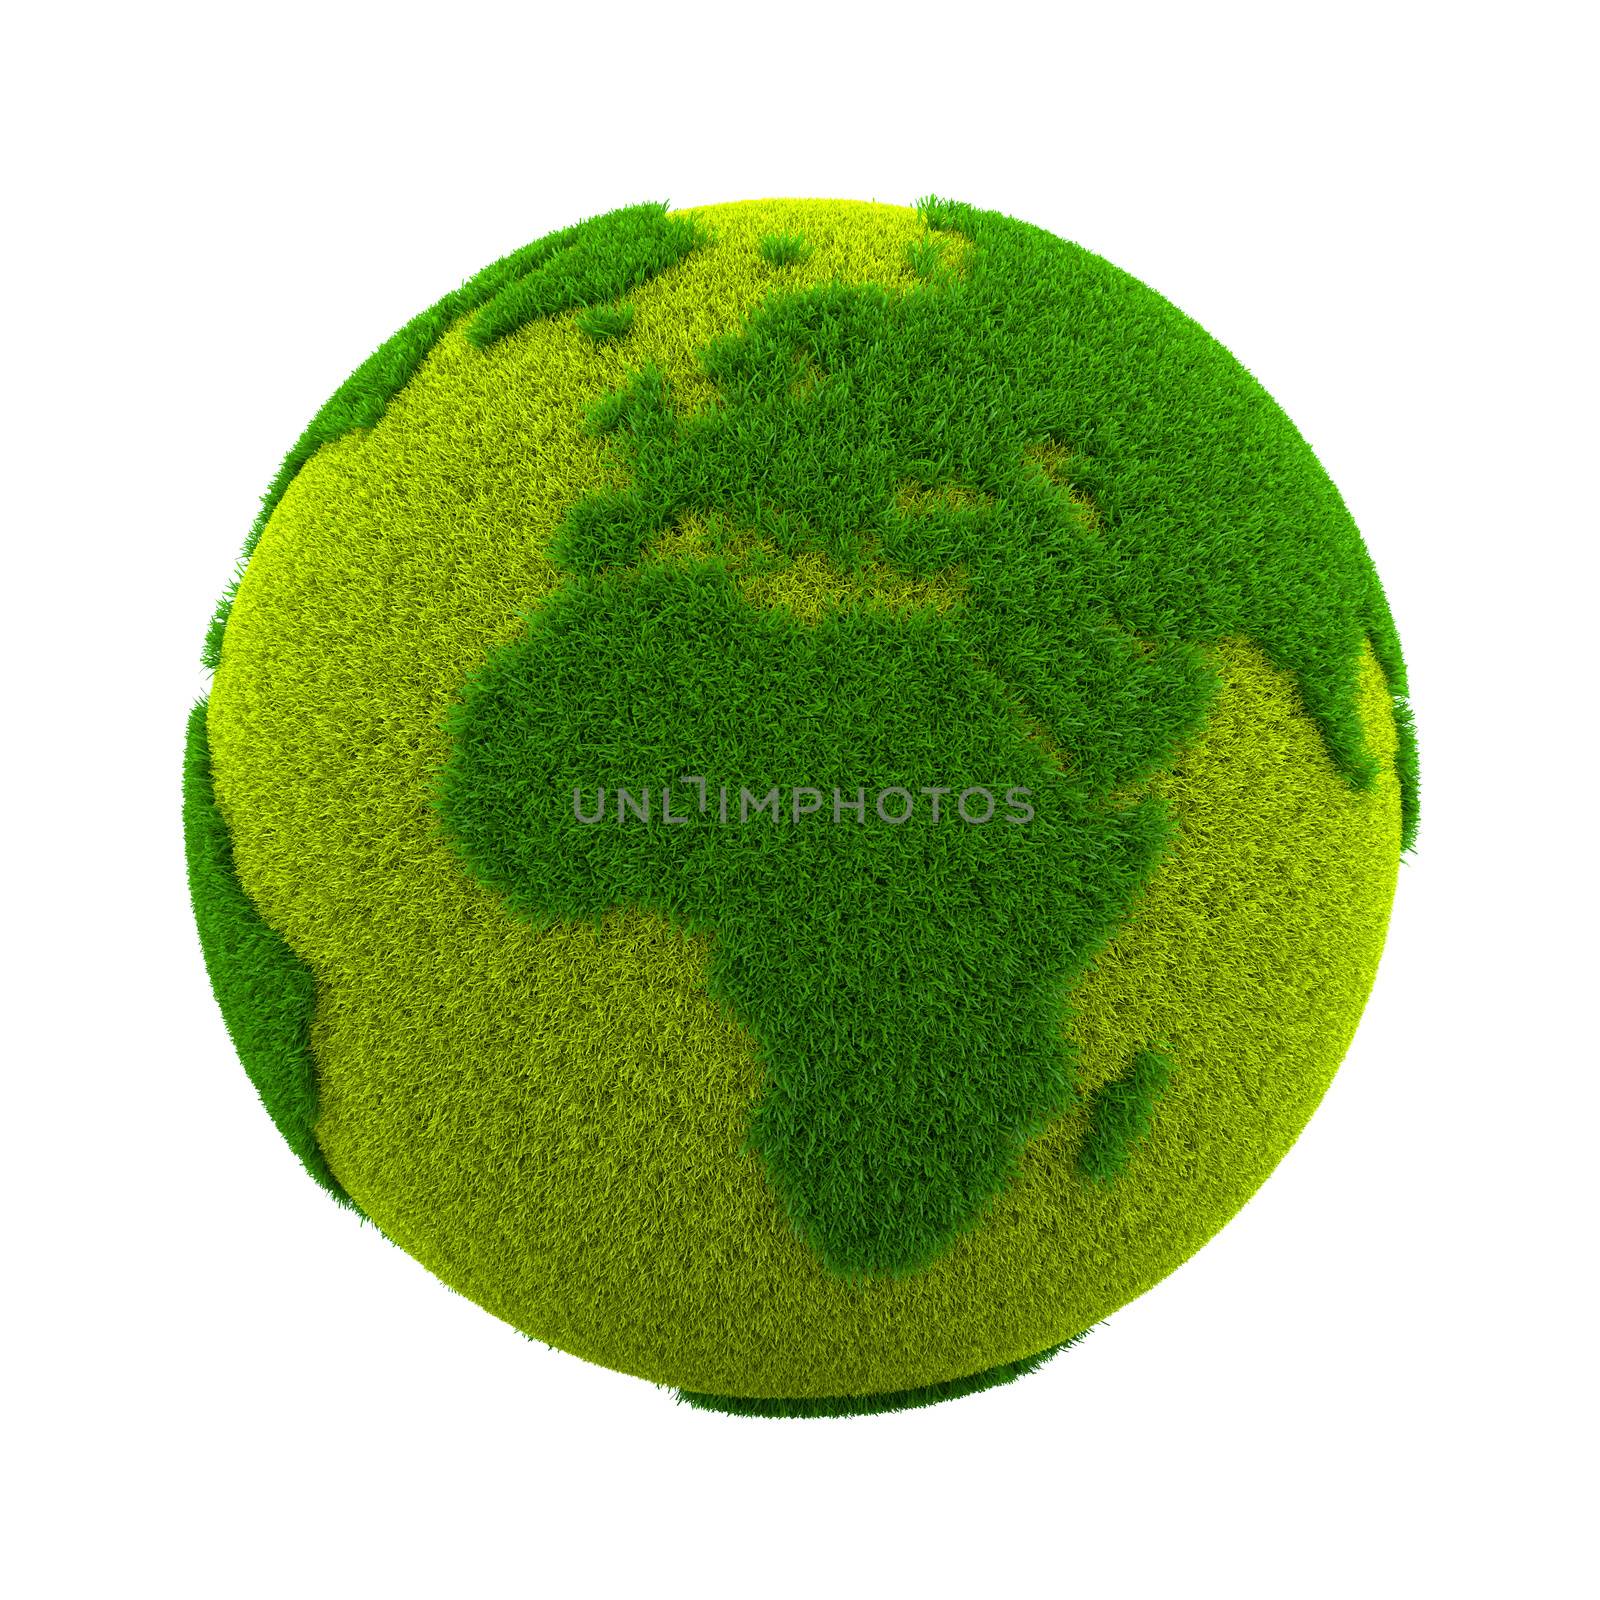 Grassy Green Earth Planet European and African Side Isolated on White Background 3D Illustration